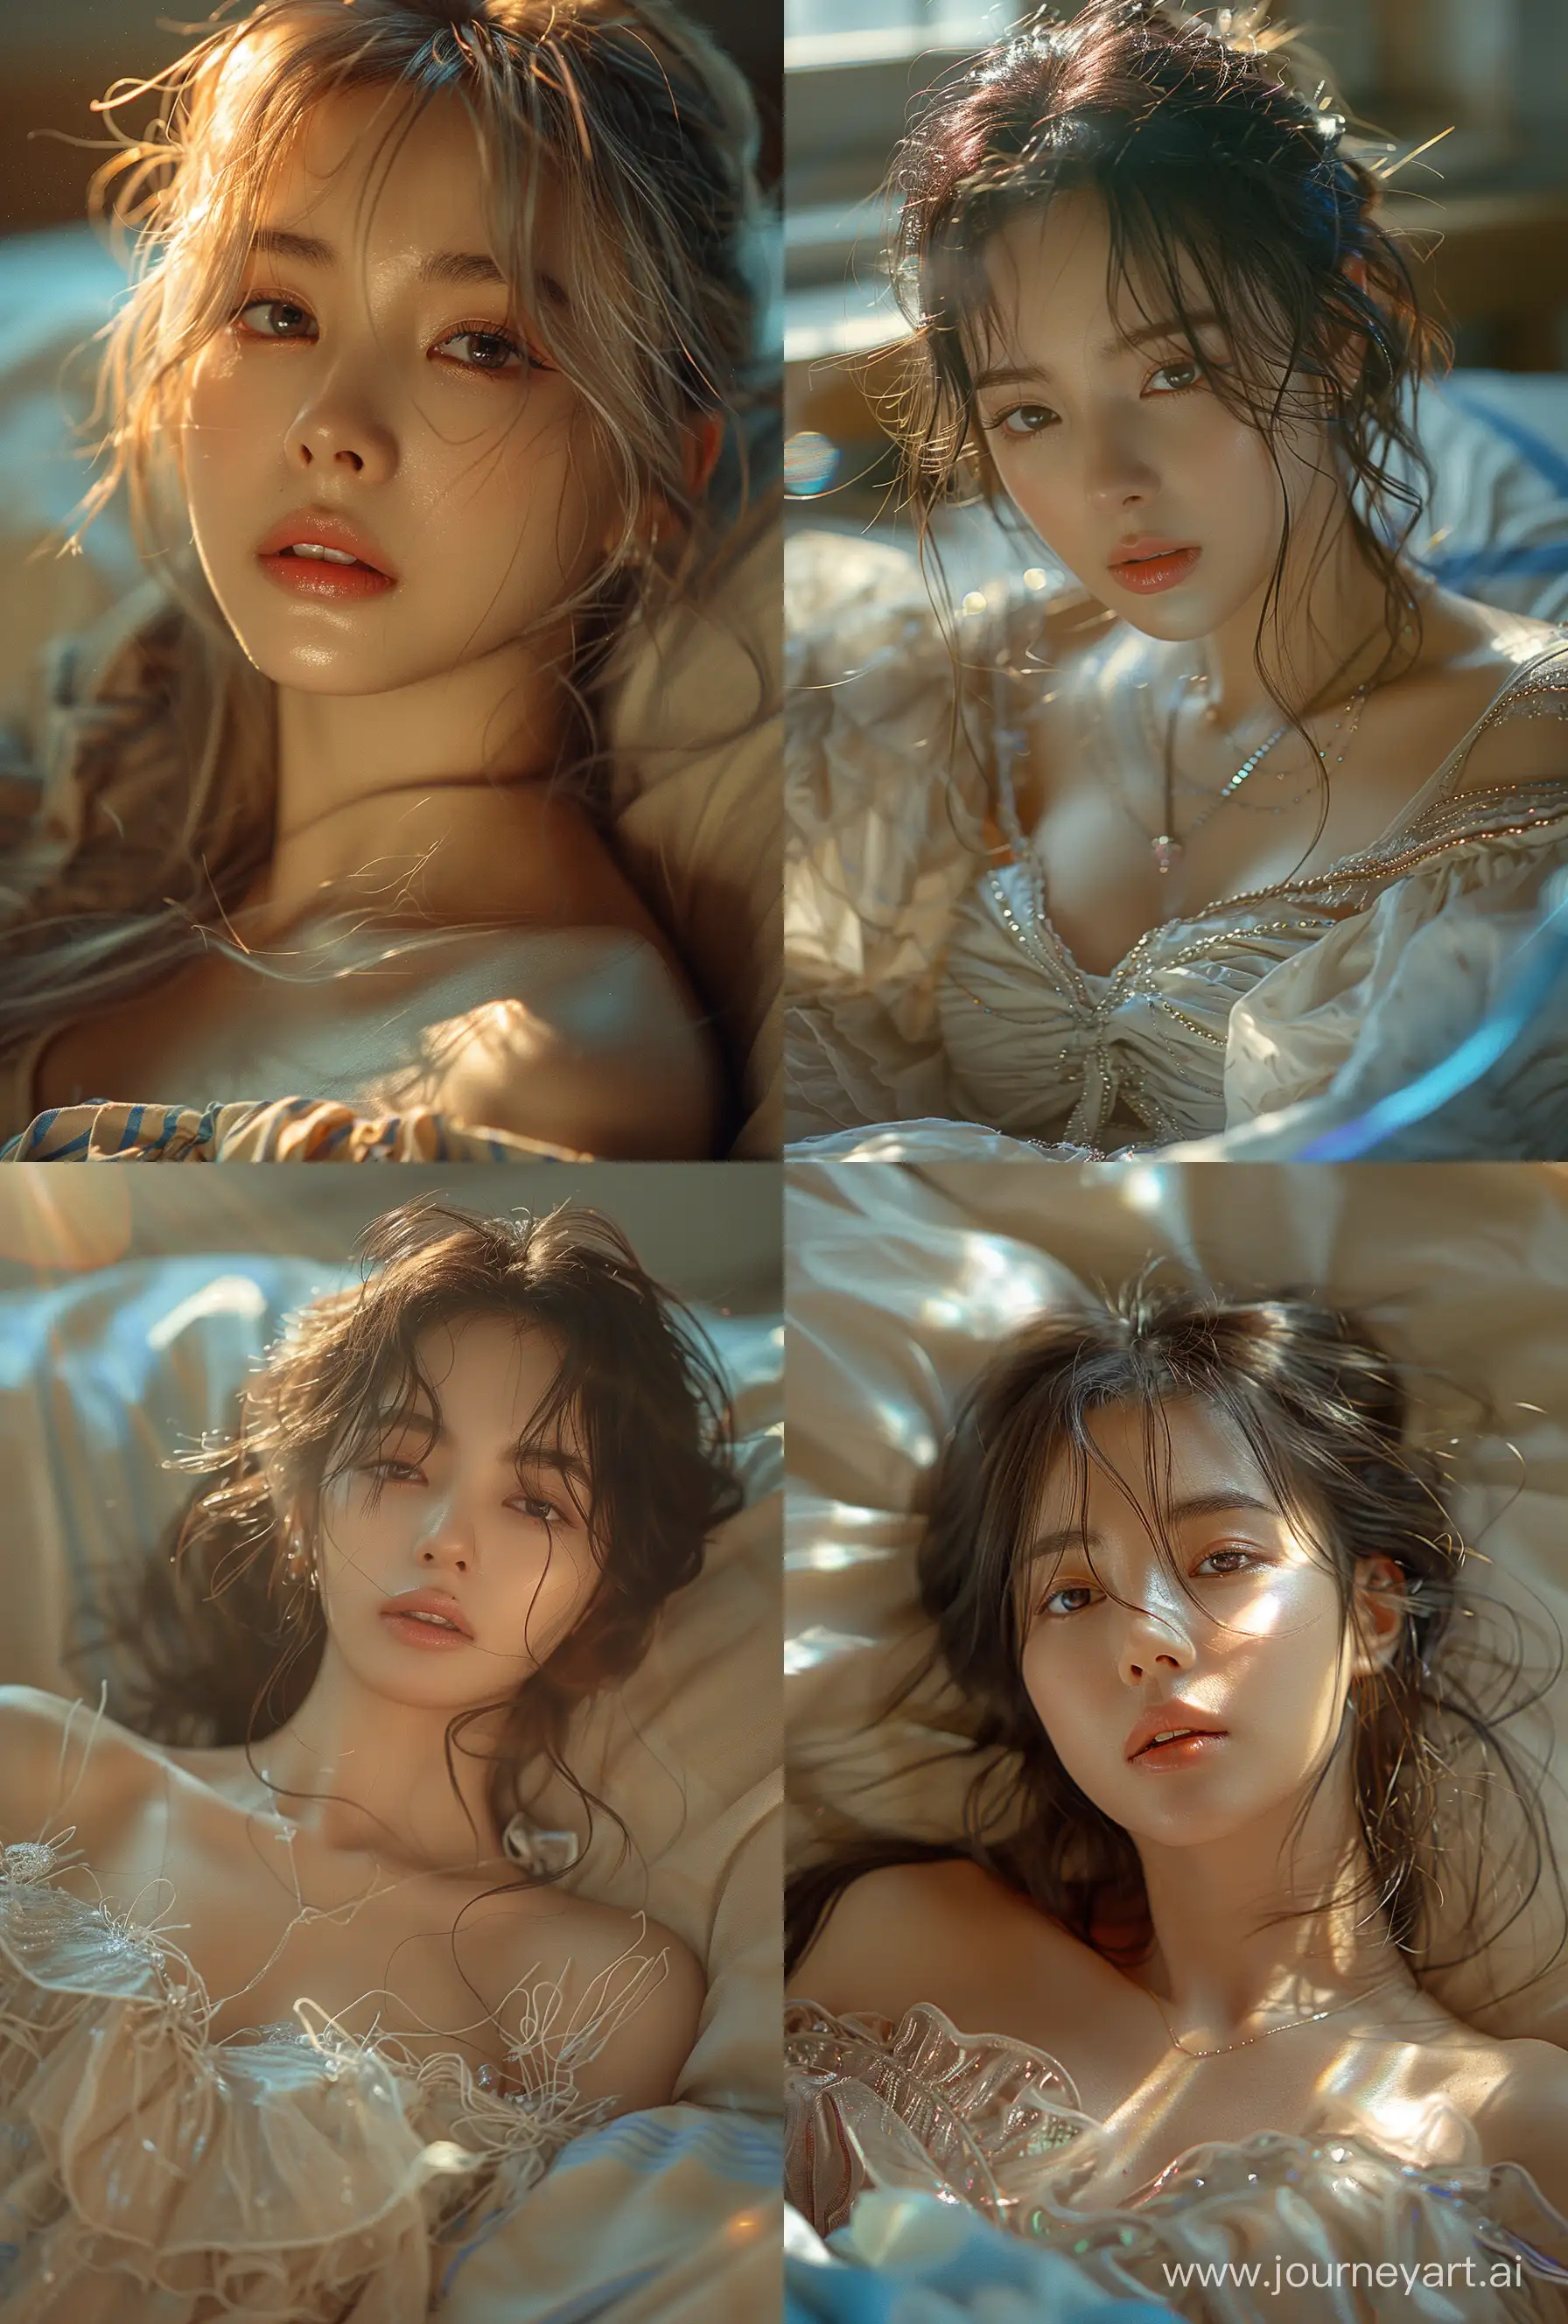 Jennie-from-Blackpink-Lounging-in-Bed-with-Anamorphic-Lens-Flare